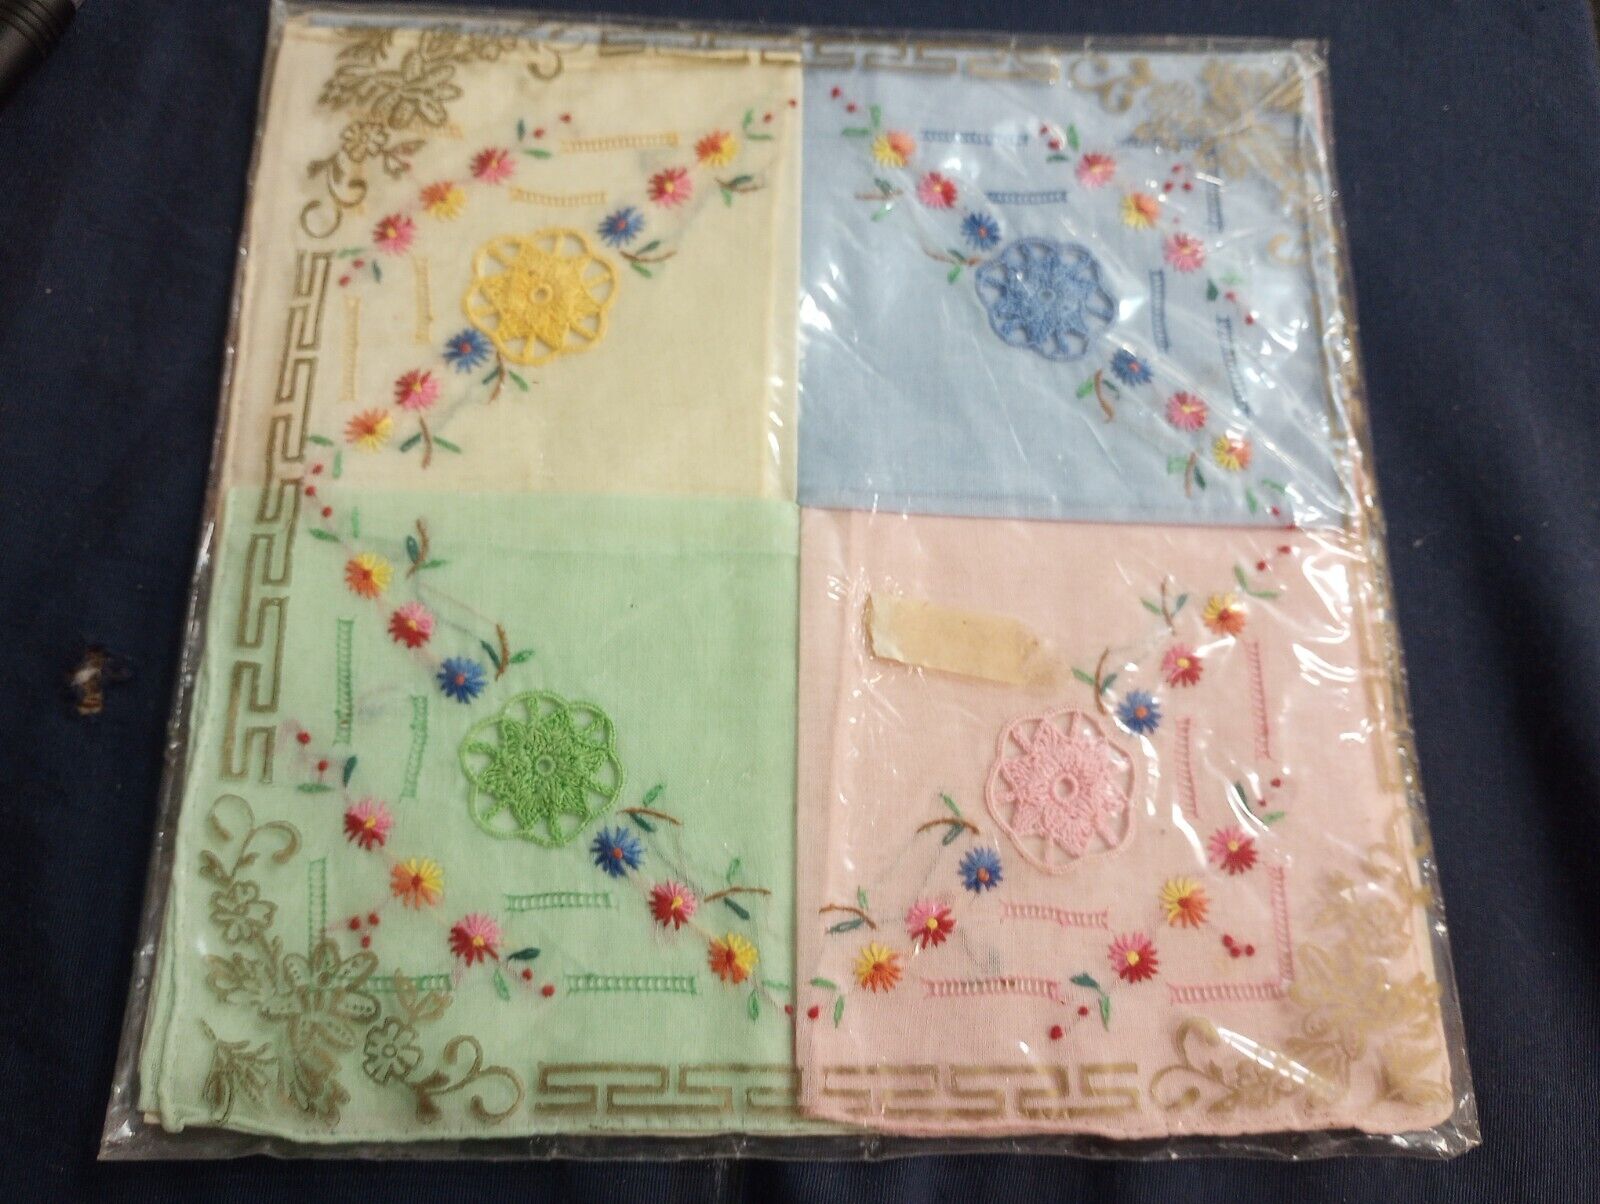 4x Vintage Hand Embroidered Hankies in Original Package Colorful